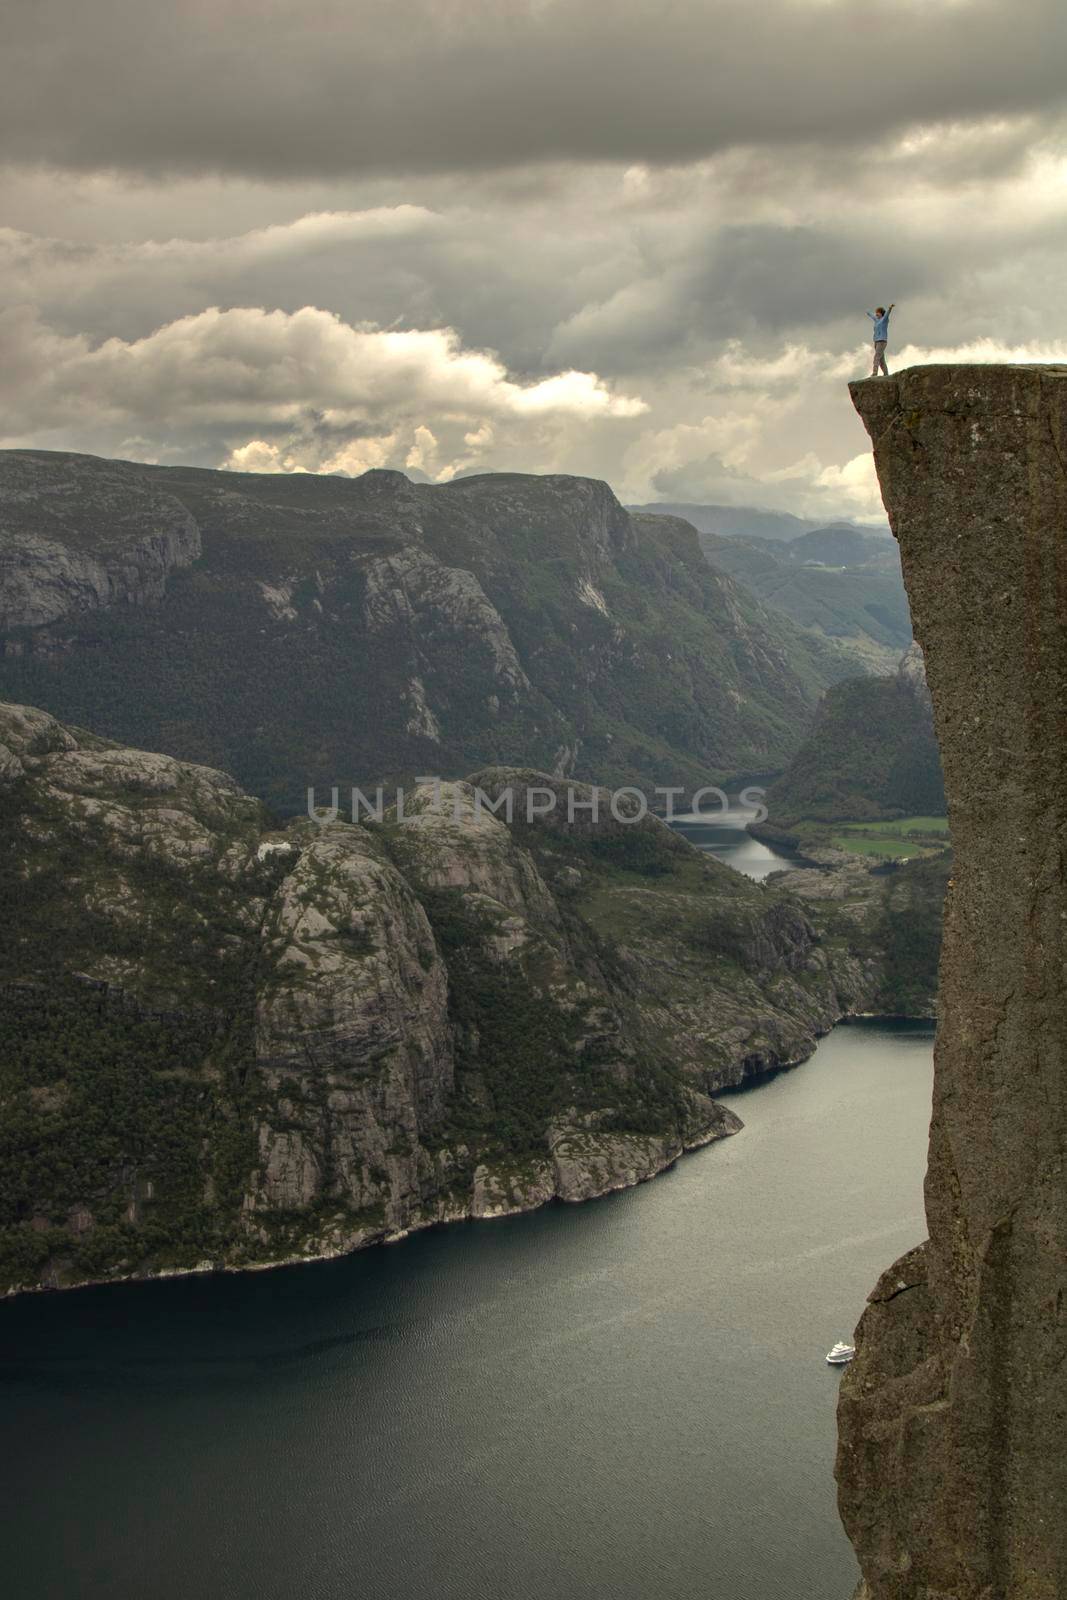 Preikestolen is a very famous tourist attraction in the municipality of Strand in Rogaland county in Norway